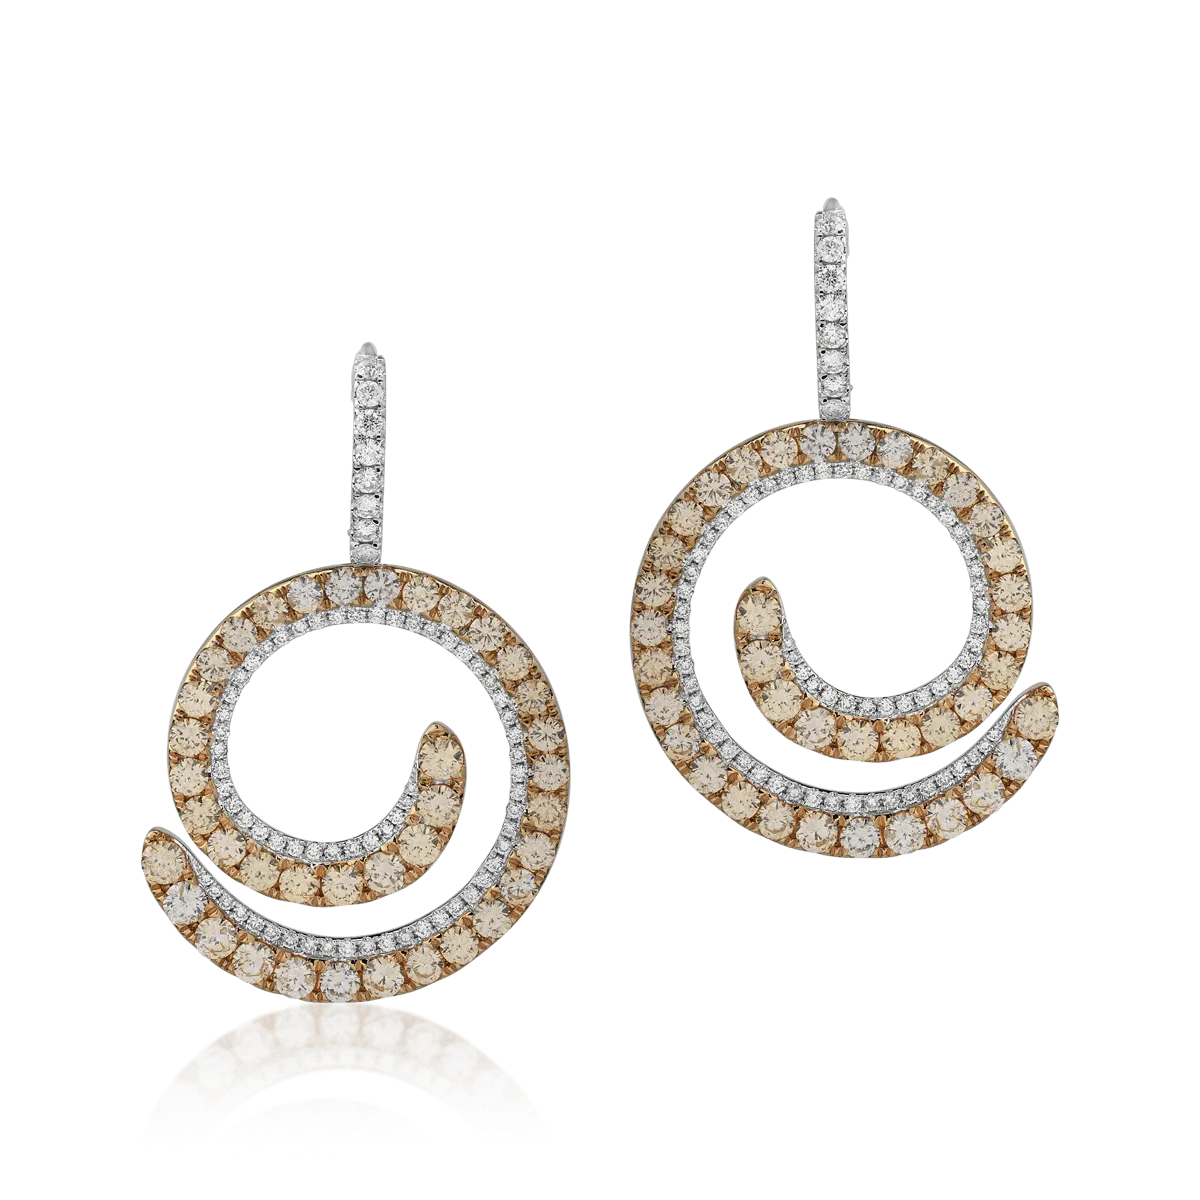 18K white-yellow gold earrings with 3.64ct light yellow diamonds and 0.86ct clear diamonds